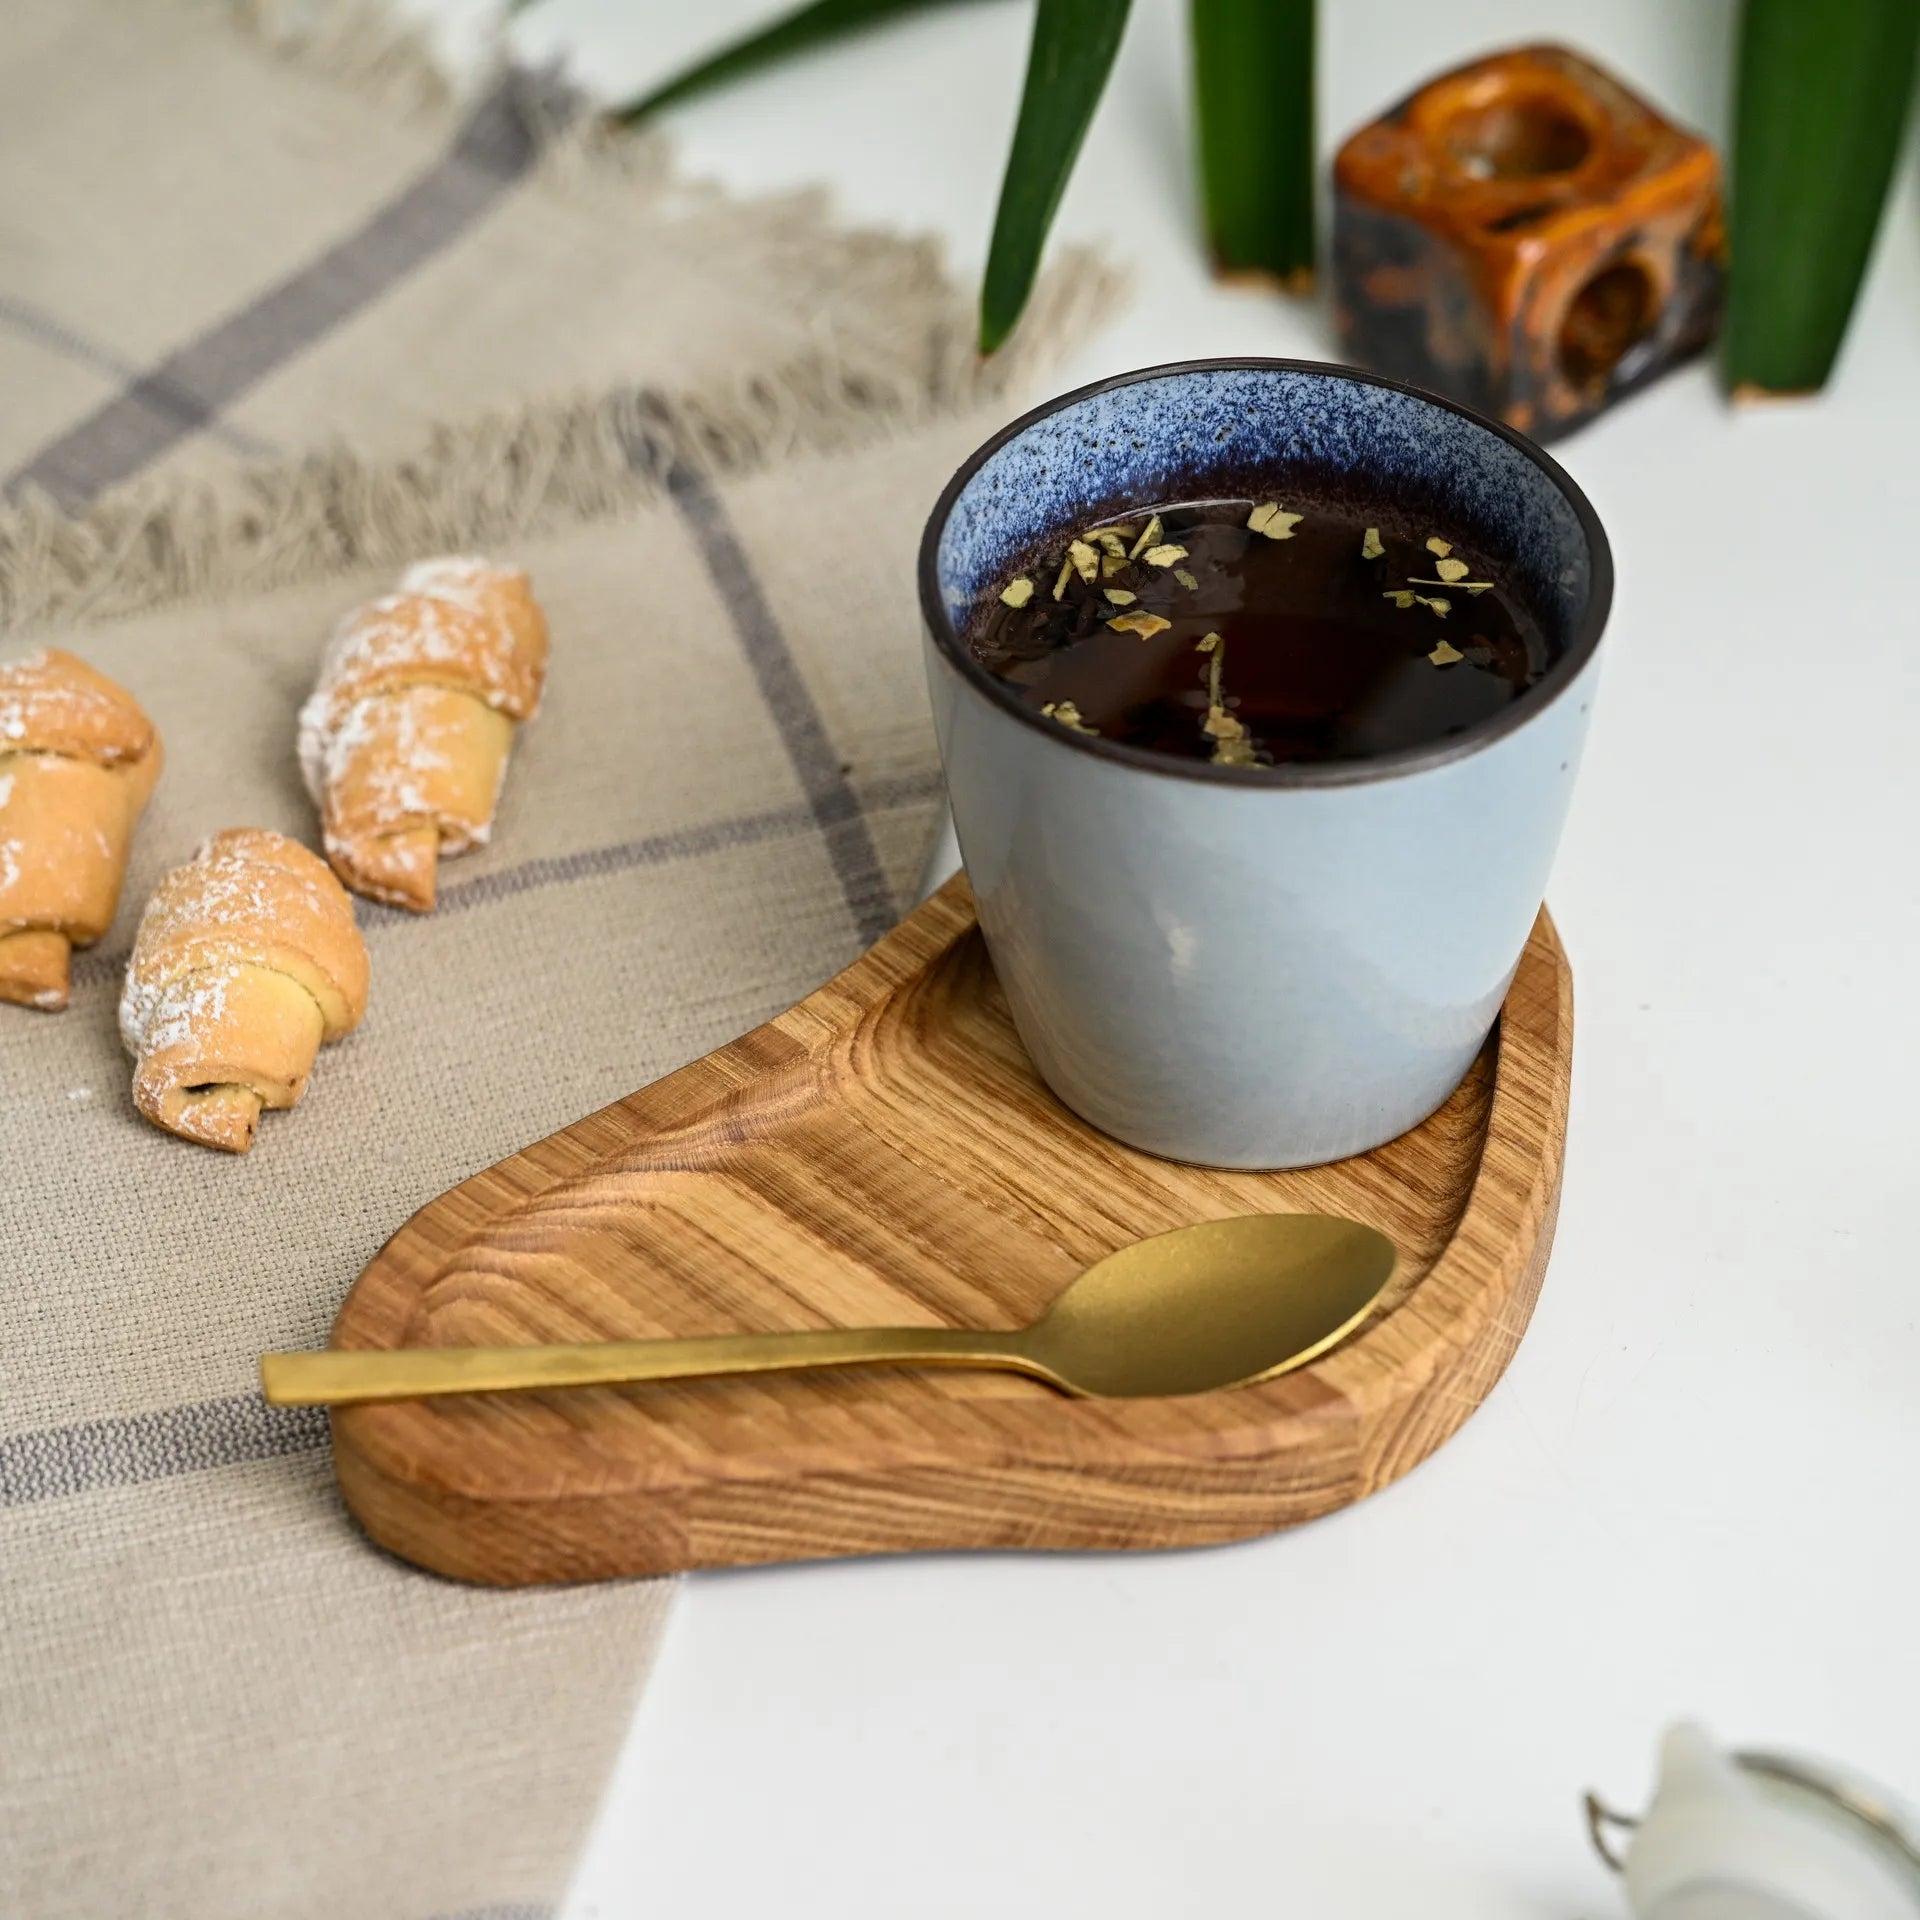 Rustic wooden tray, perfect for hotel breakfast service, providing a charming and functional way to deliver morning meals to guests.